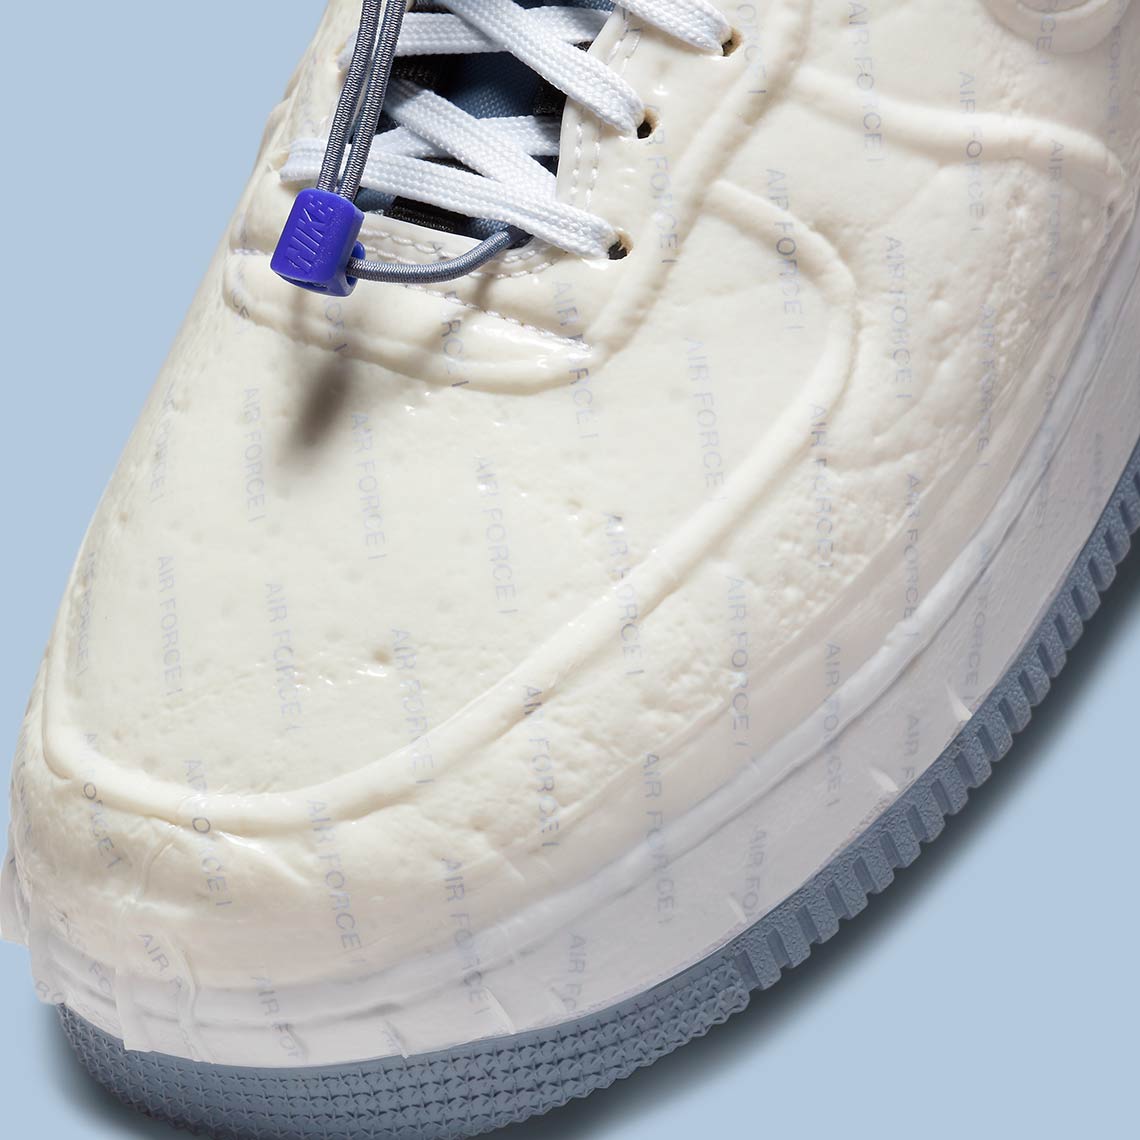 Nike Air Force 1 Experimental USPS Size 9 Postal Ghost CZ1528-100 Brand New